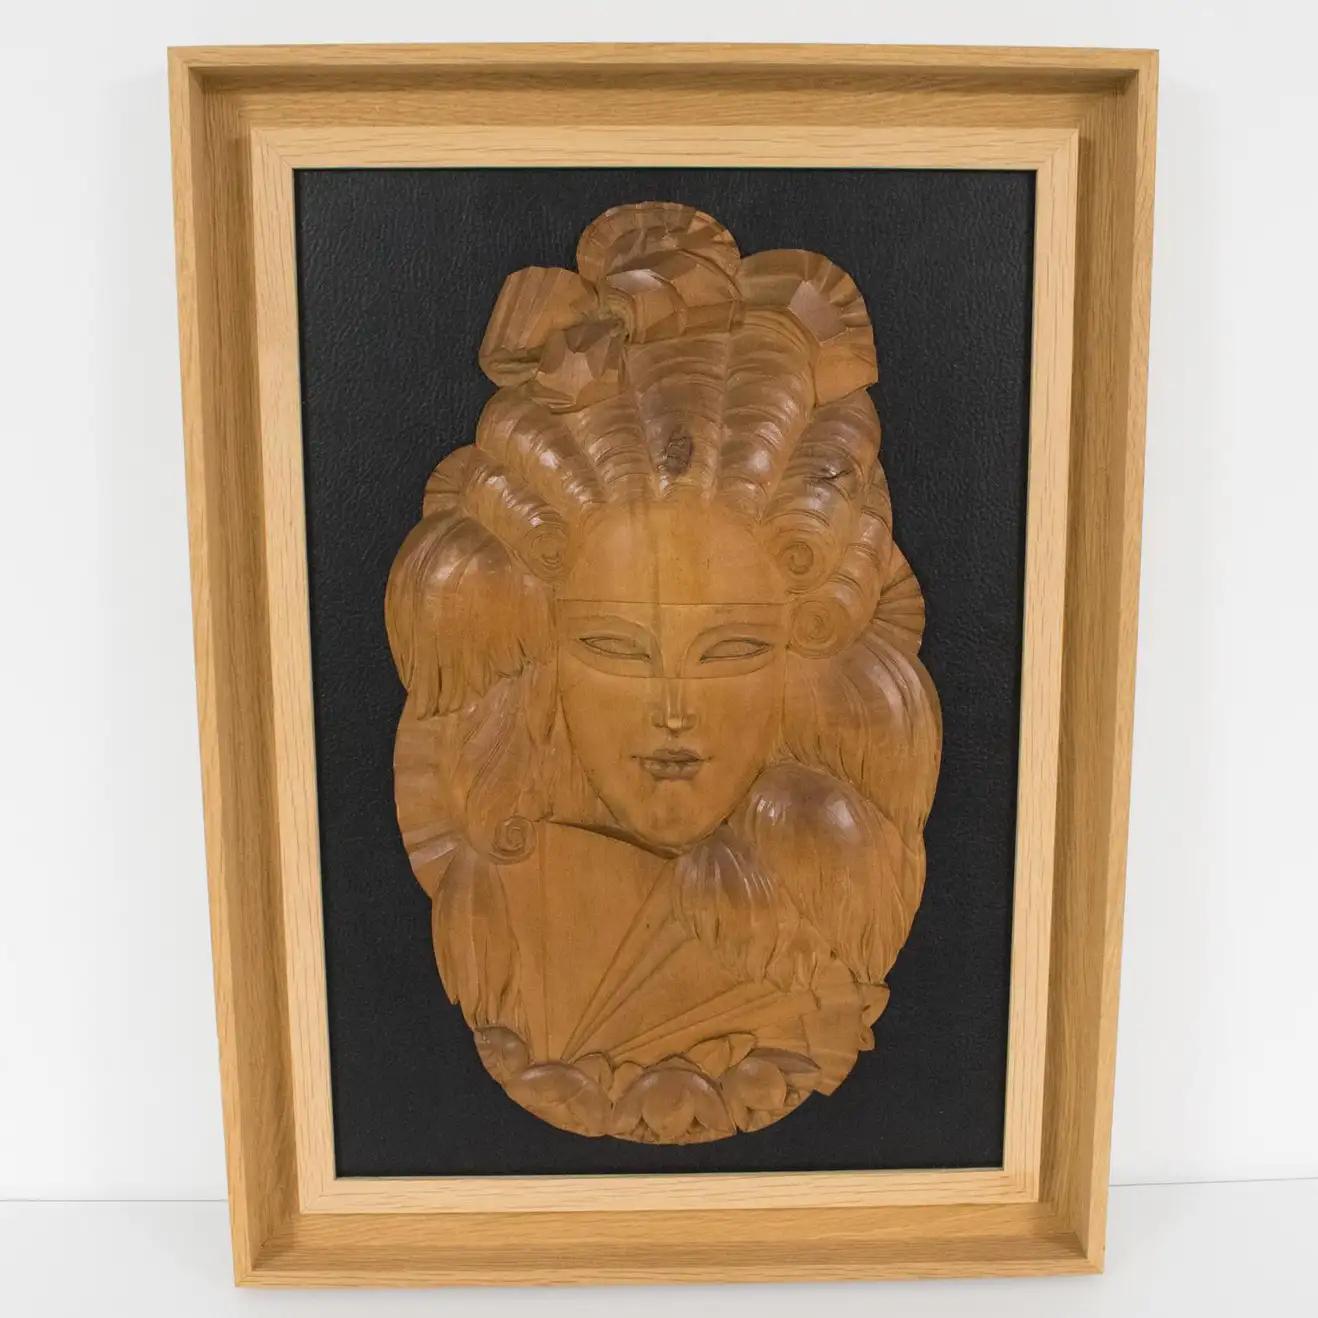 Art Deco Handcrafted Wood Panel Wall Sculpture Venetian Mask, 1930s For Sale 3